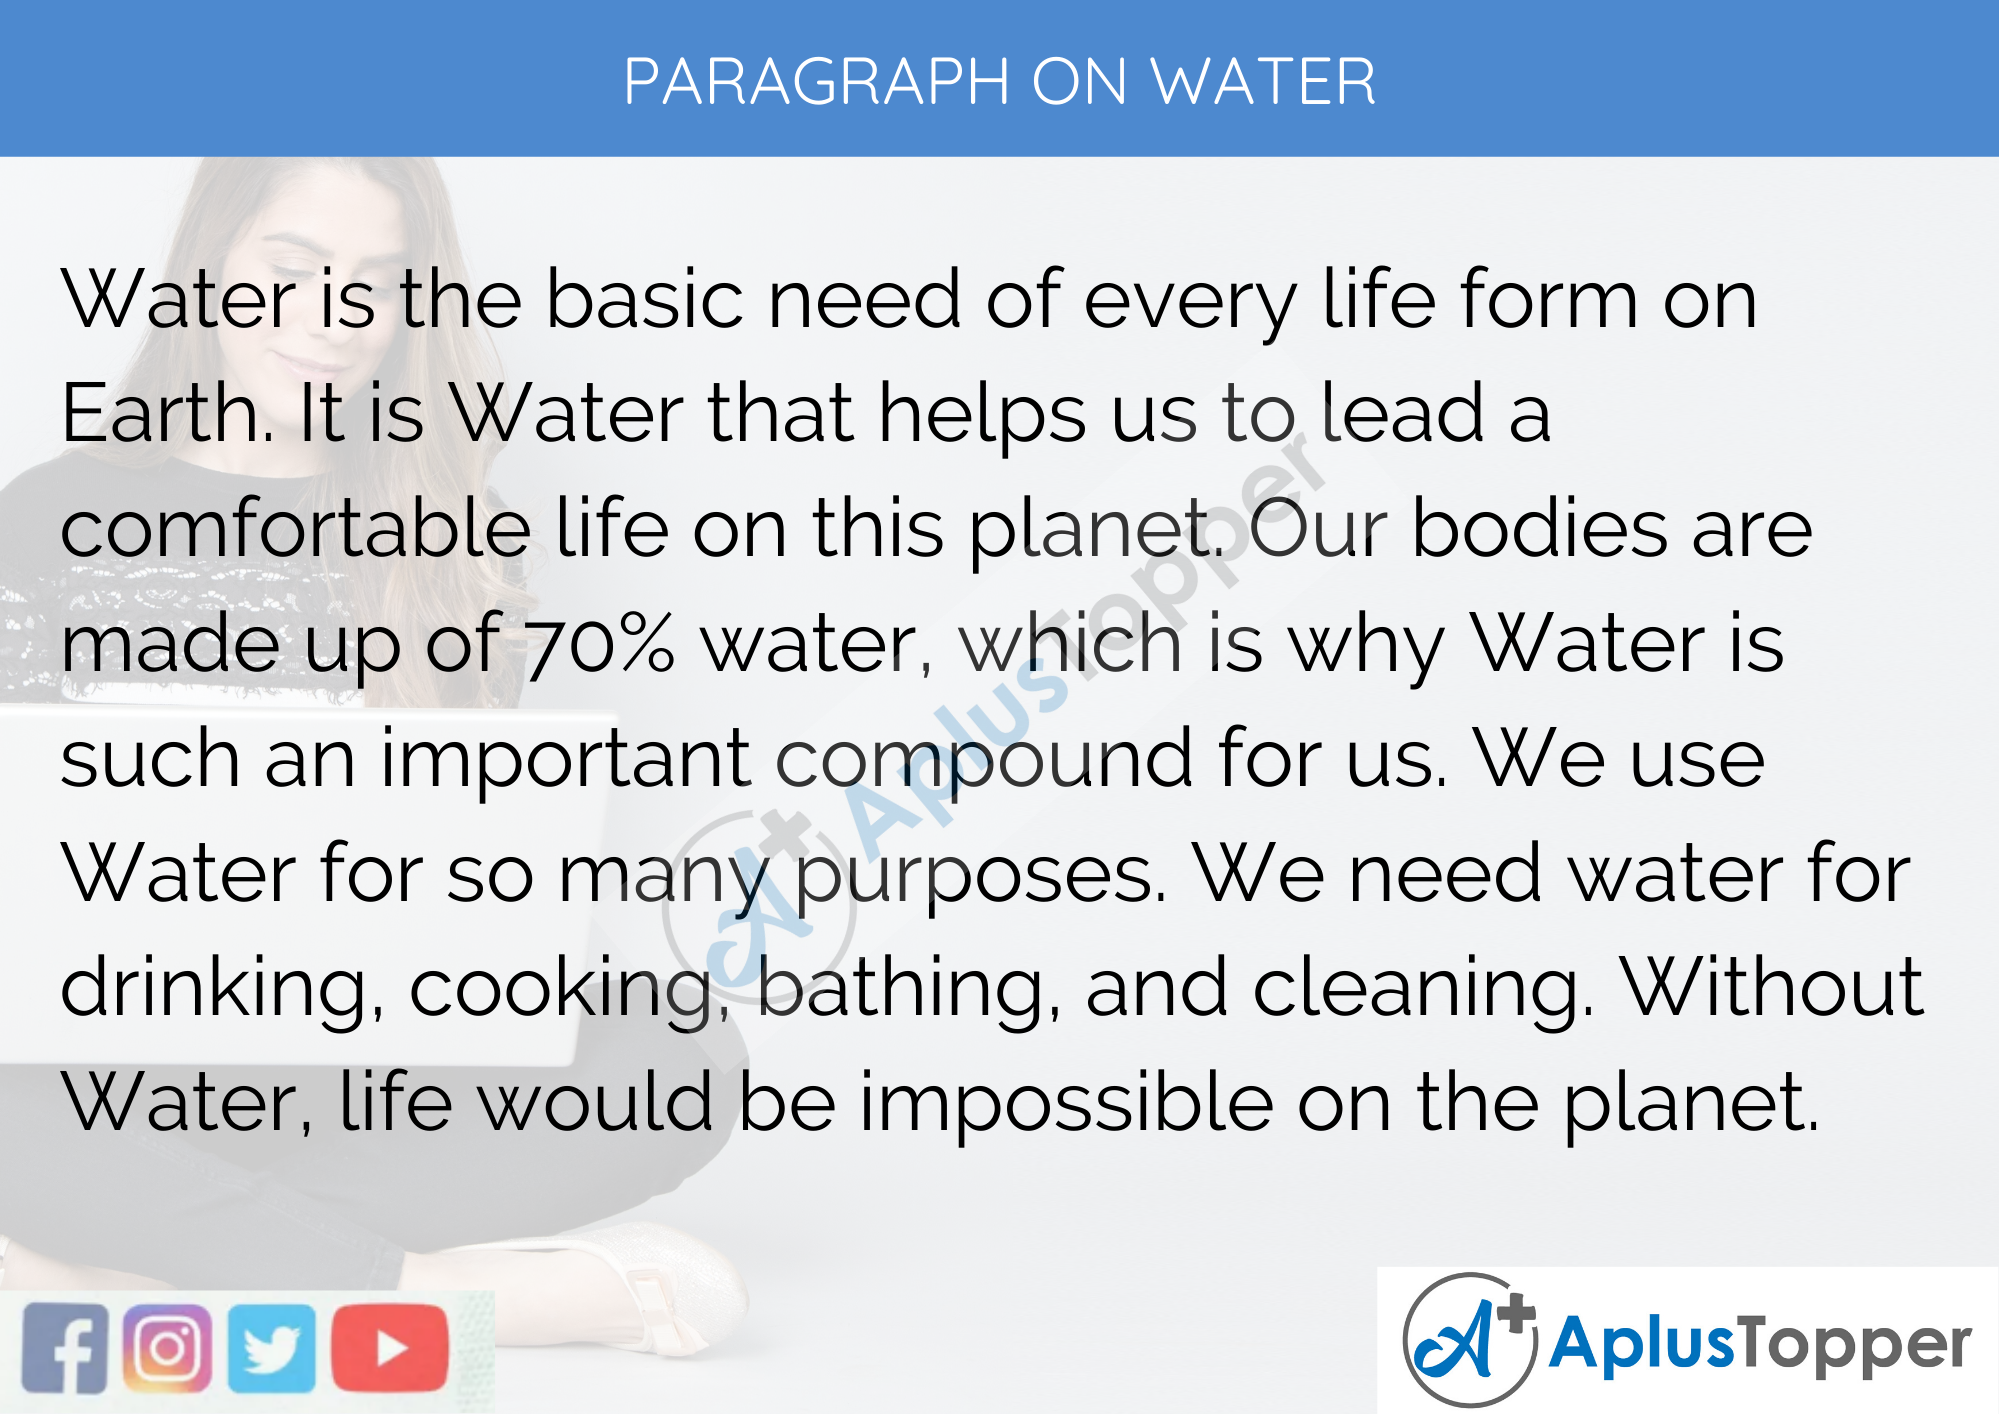 importance of water supply essay